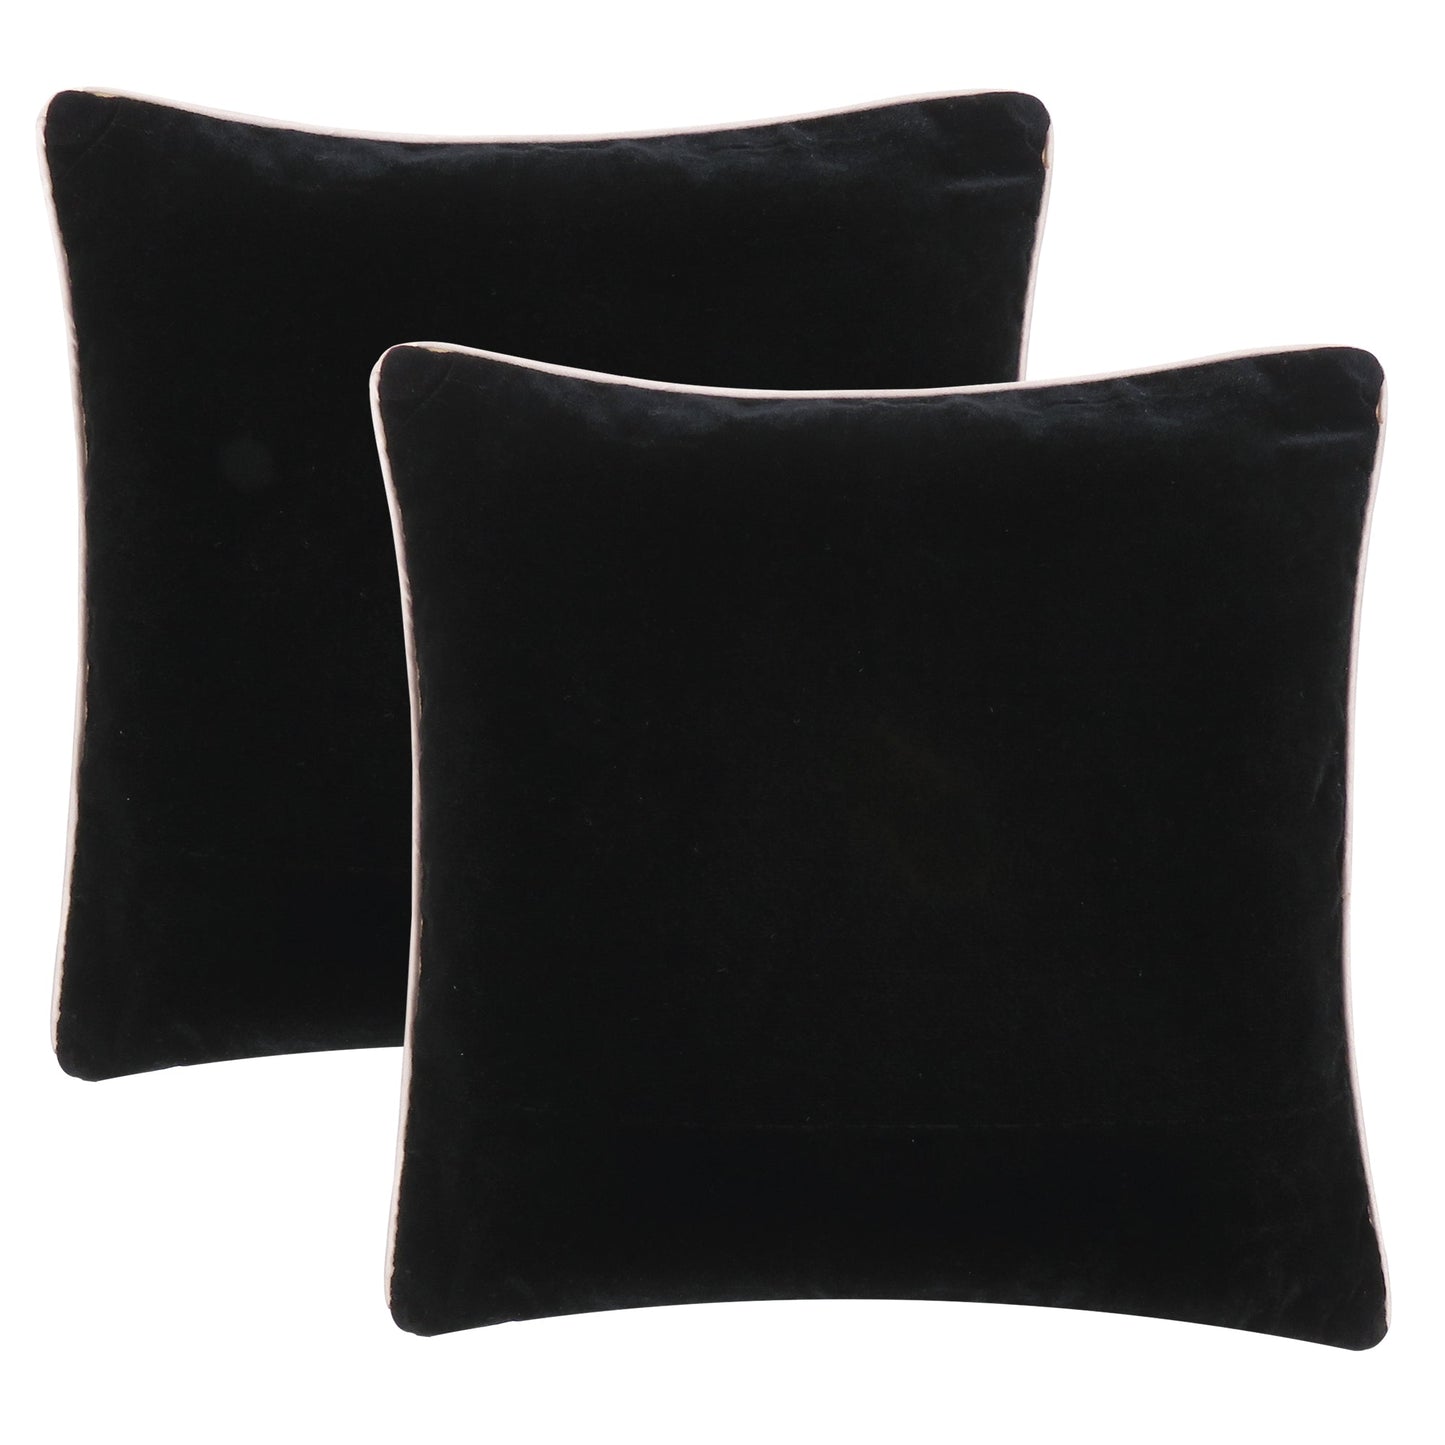 Black Velvet Cushion Cover with Off White Piping Edge in Set of 2